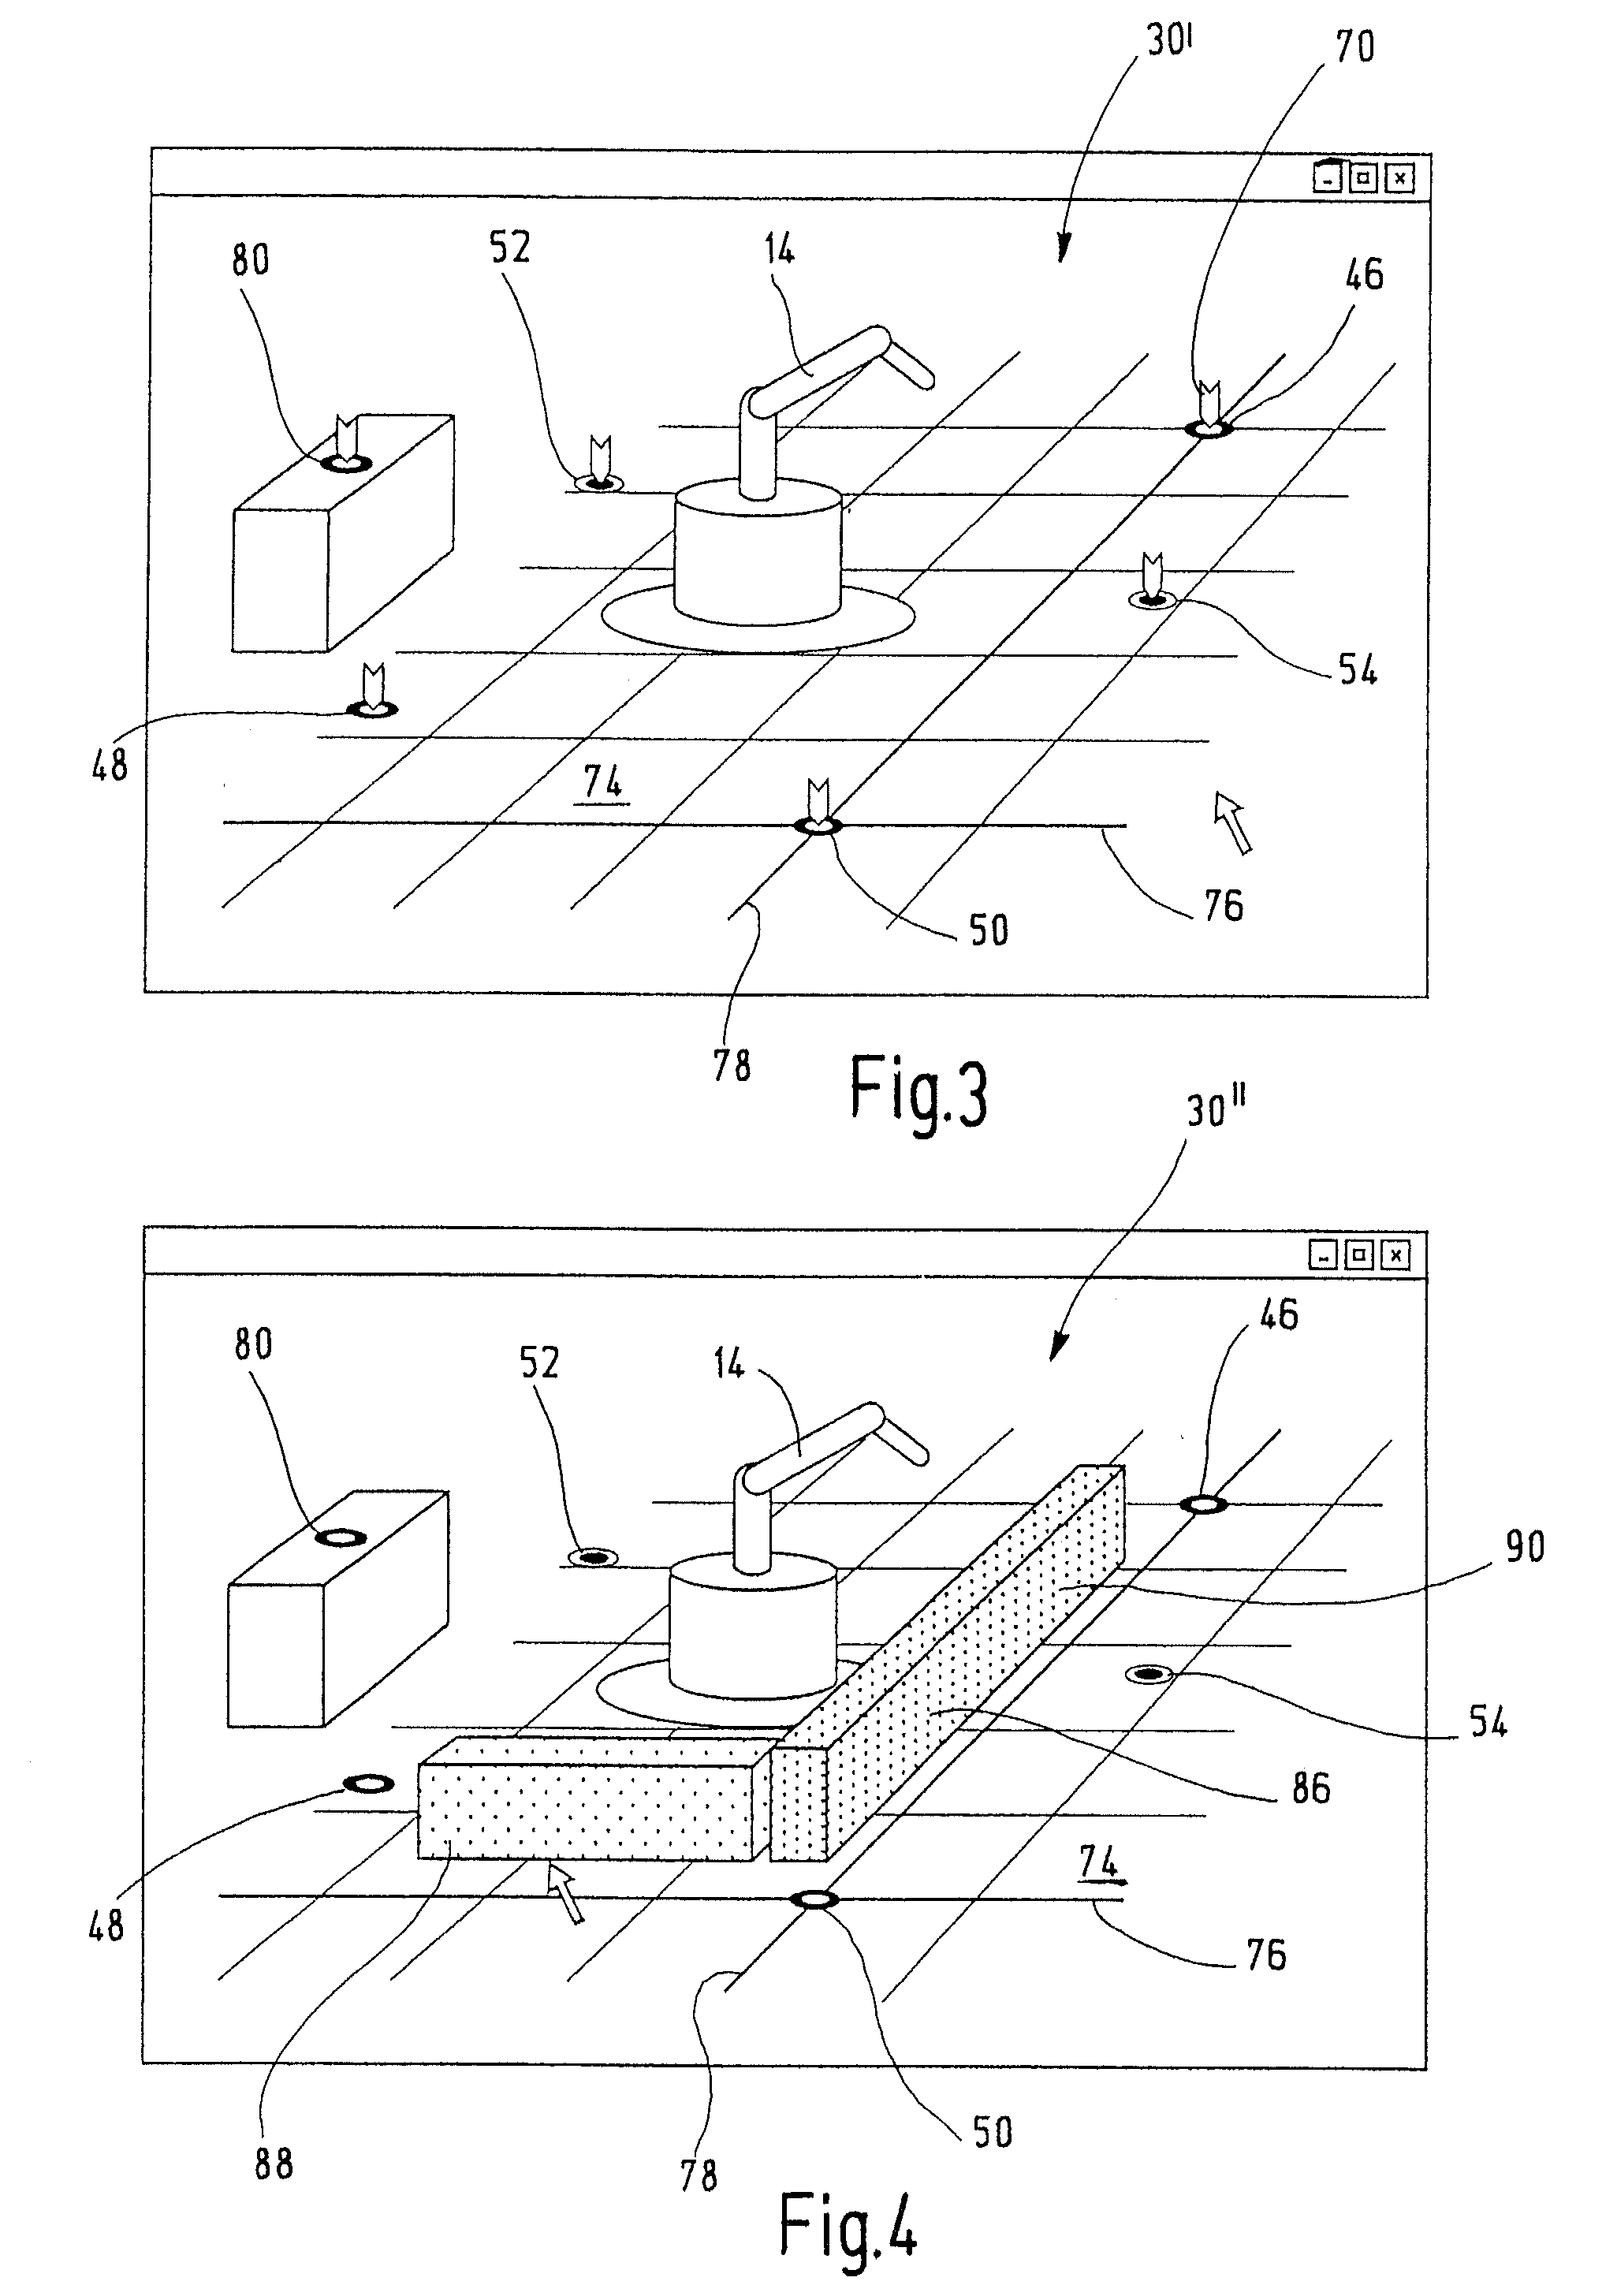 Method and system for configuring a monitoring device for monitoring a spatial area